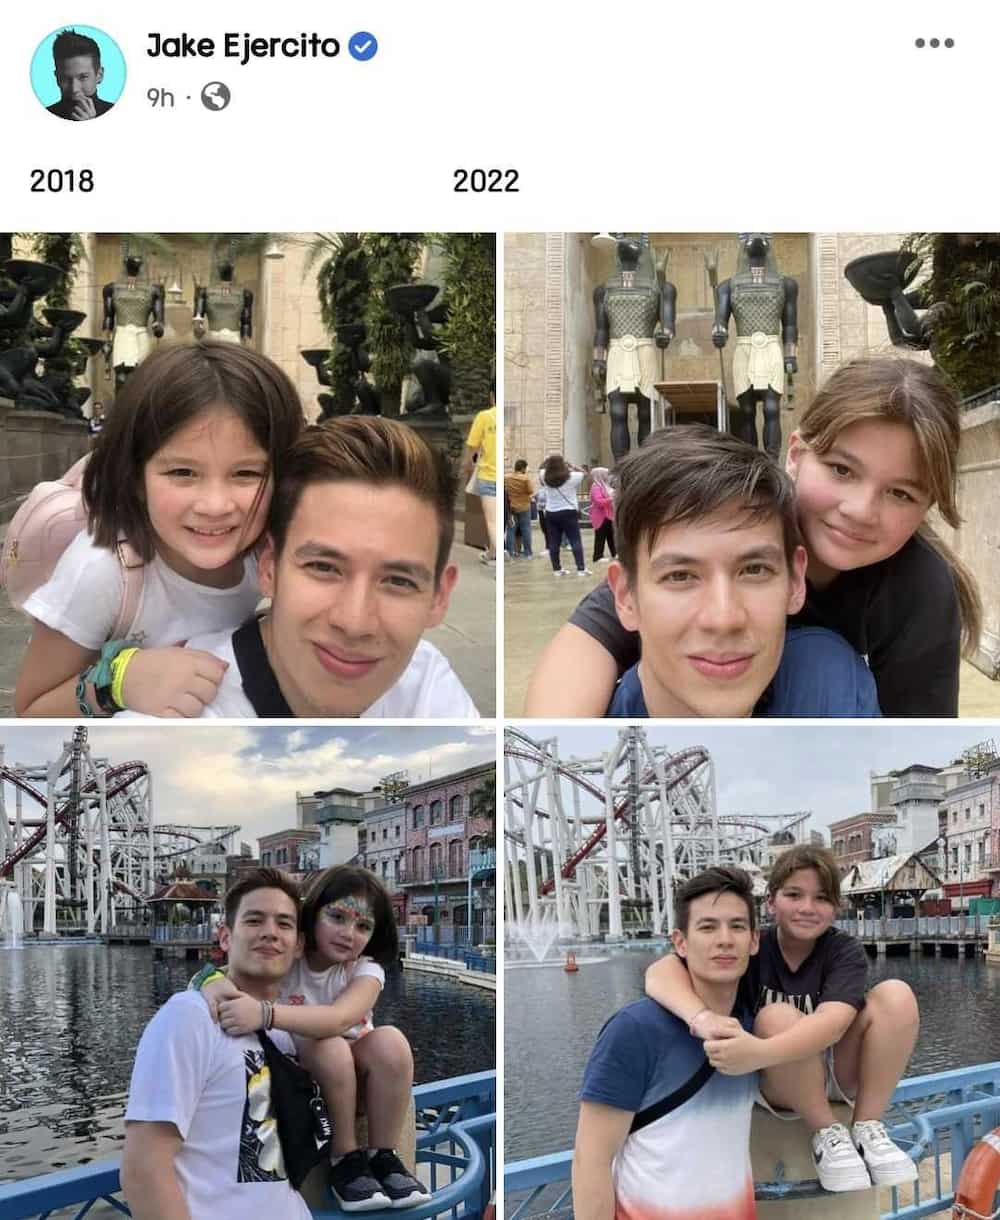 Jake Ejercito recreates more old photos with Ellie Eigenmann; netizens react